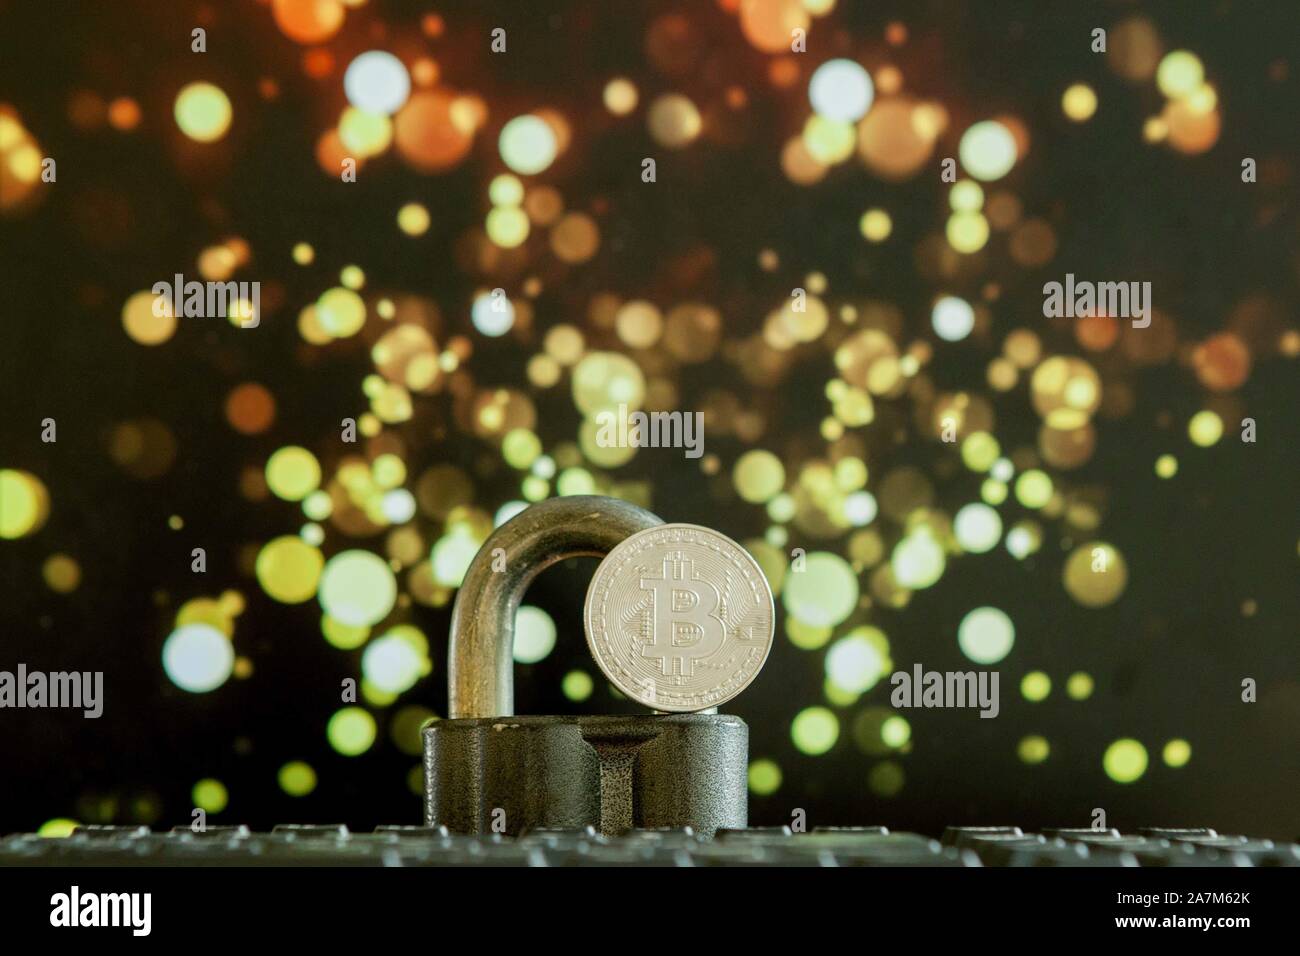 Bitcoin currency on keyboard computer on bokee background.Virtual cryptocurrency concept Stock Photo